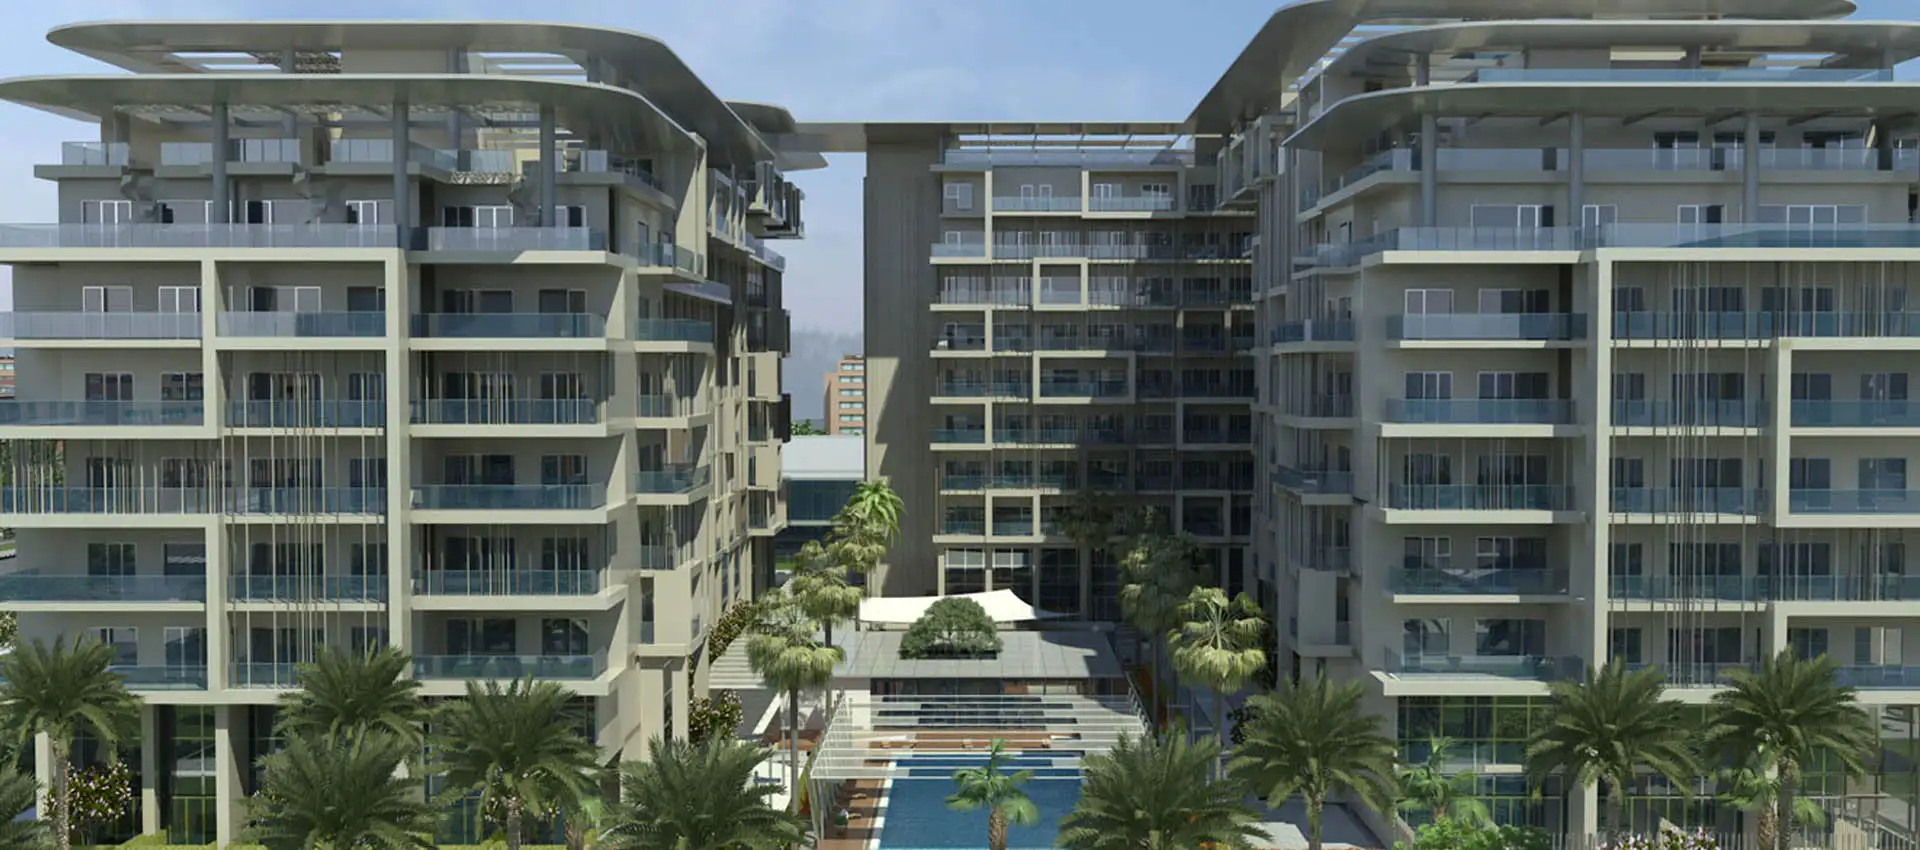 Oasis Residences One by Reportage Properties at Masdar City, Abu Dhabi